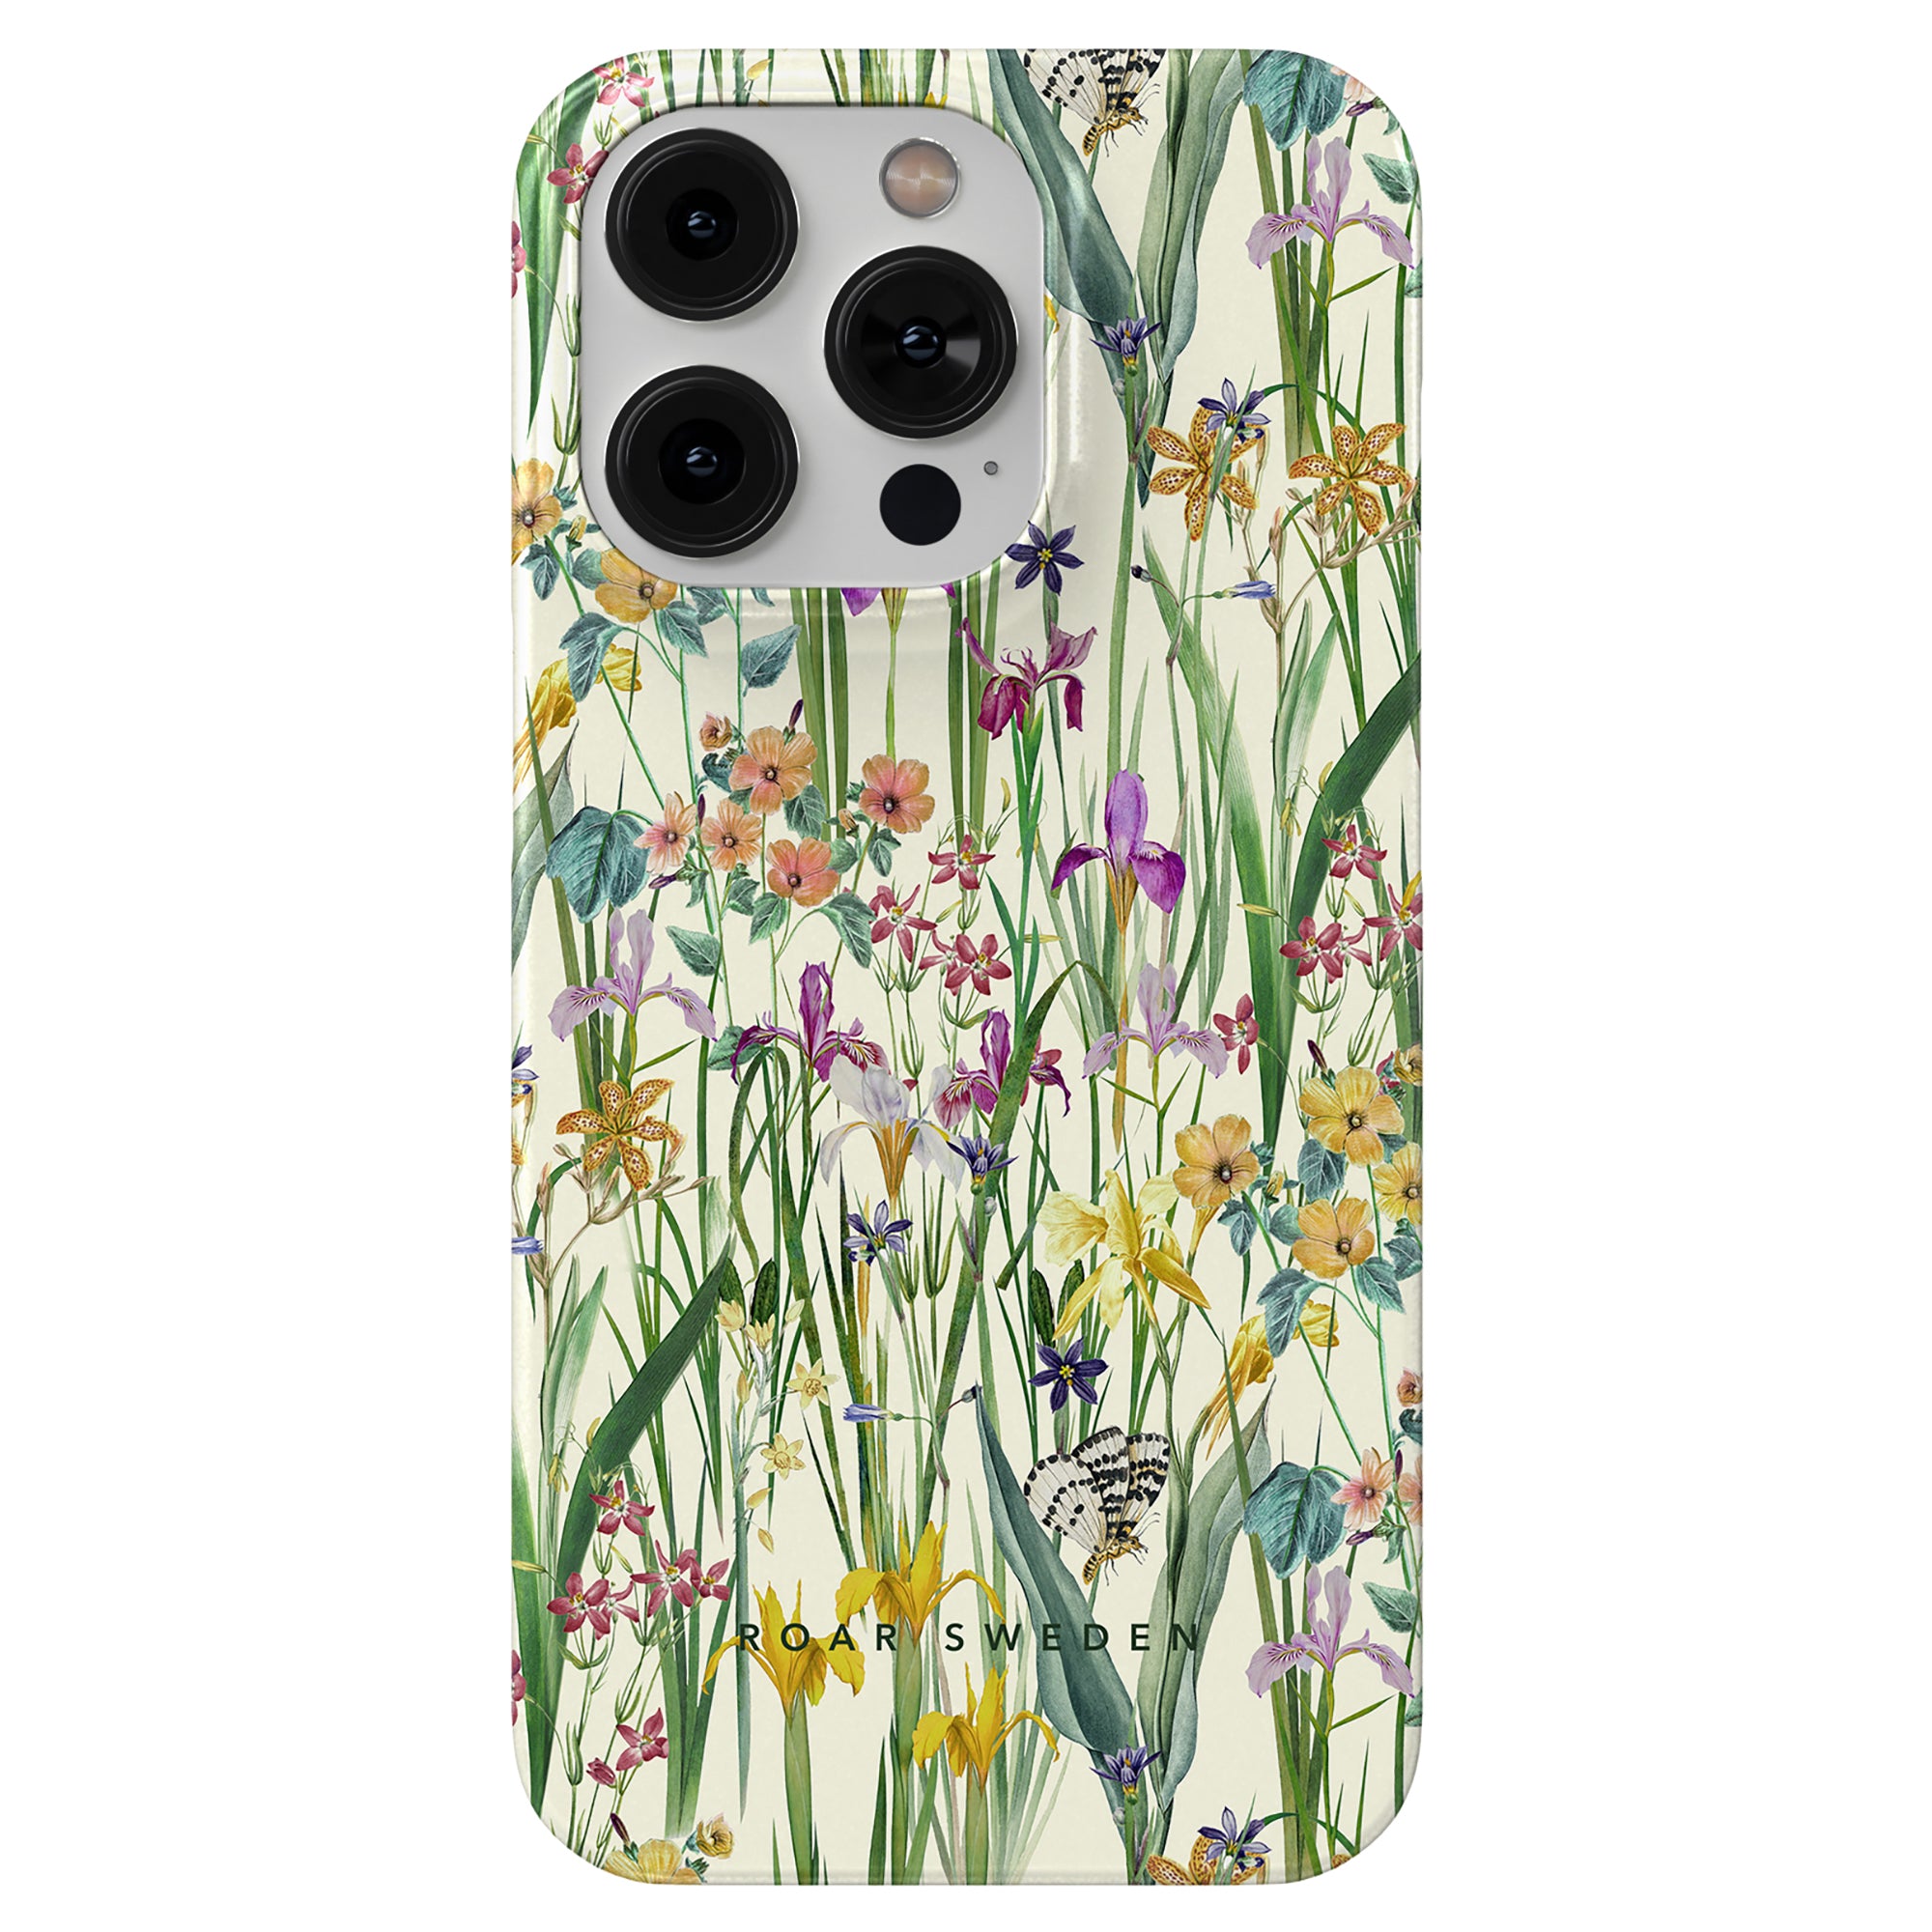 A phone case with a Blooming Meadow - Slim case design accommodating a dual-lens camera setup, ideal for those interested in anti-aging skincare.